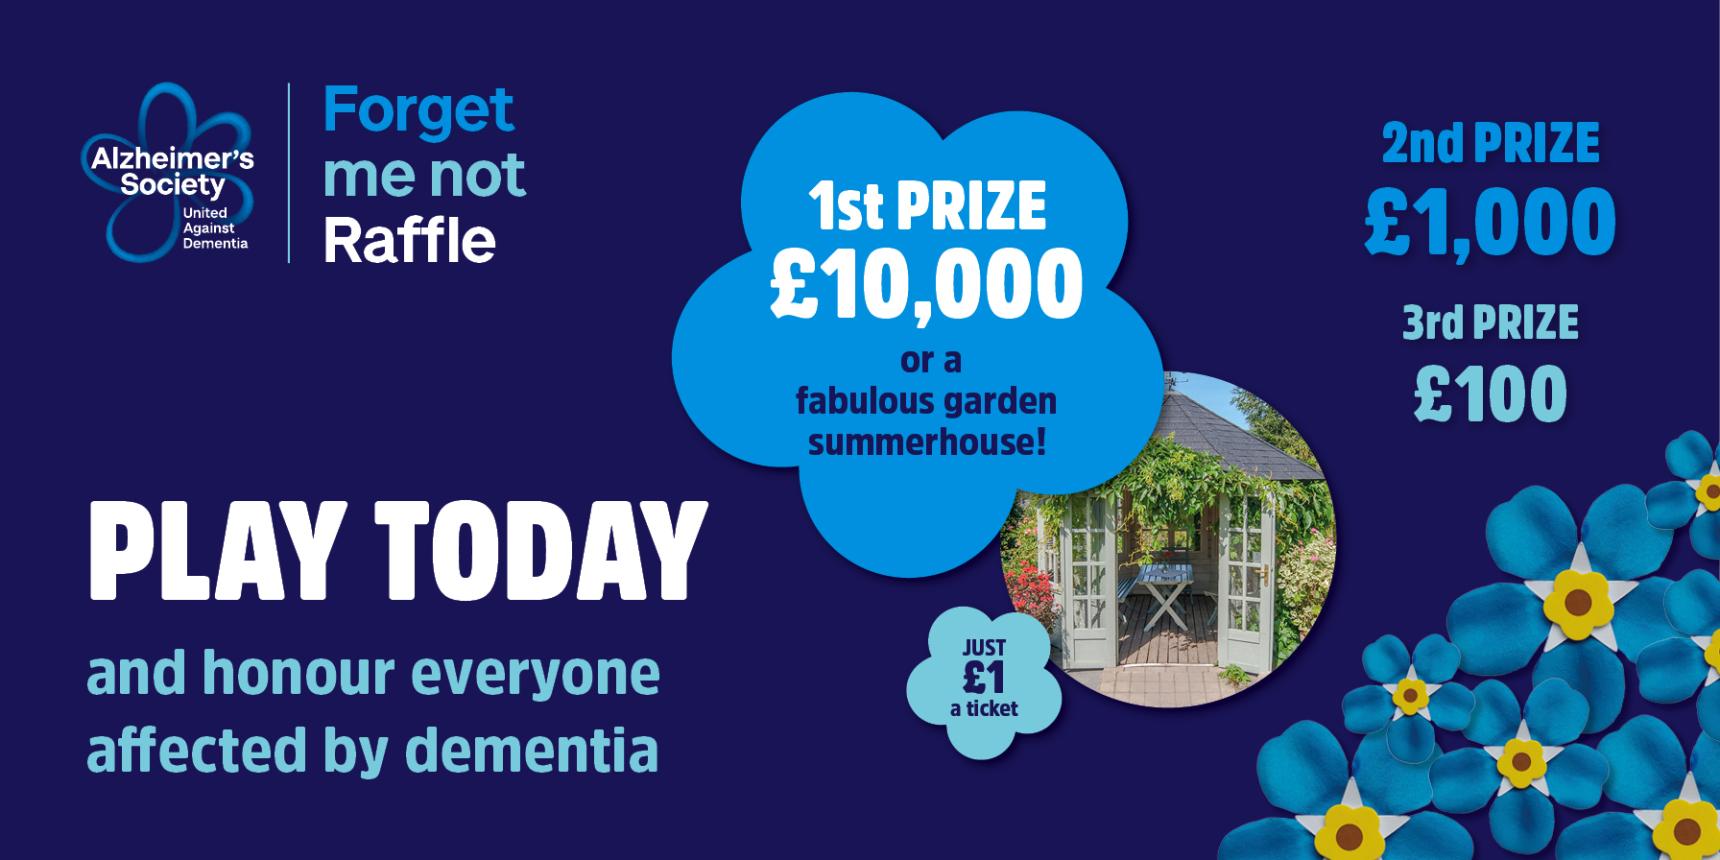 Forget Me Not Raffle. Play today and honour everyone affected by dementia. Tickets are only £1 each.